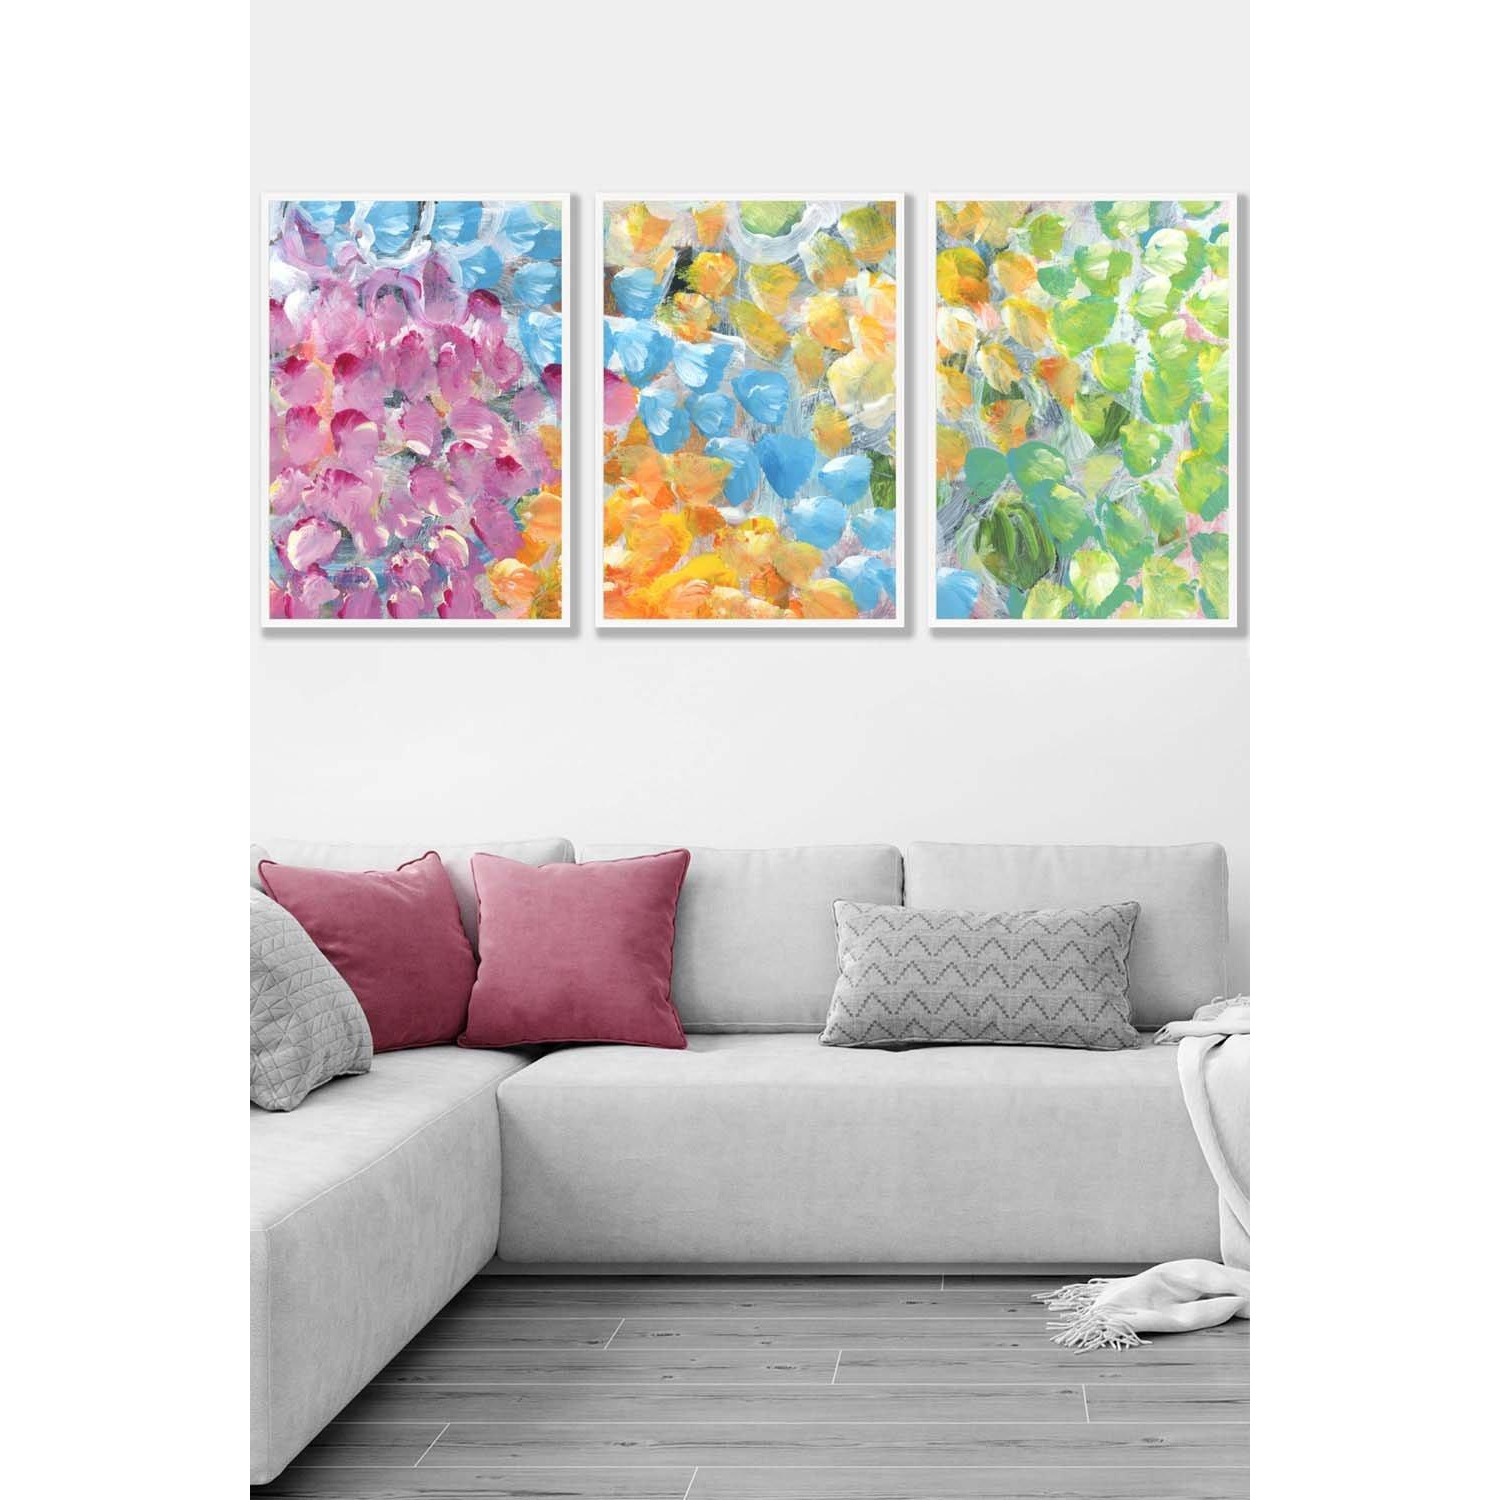 Set of 3 White Framed Abstract Tropical Summer Fruits Wall Art - image 1